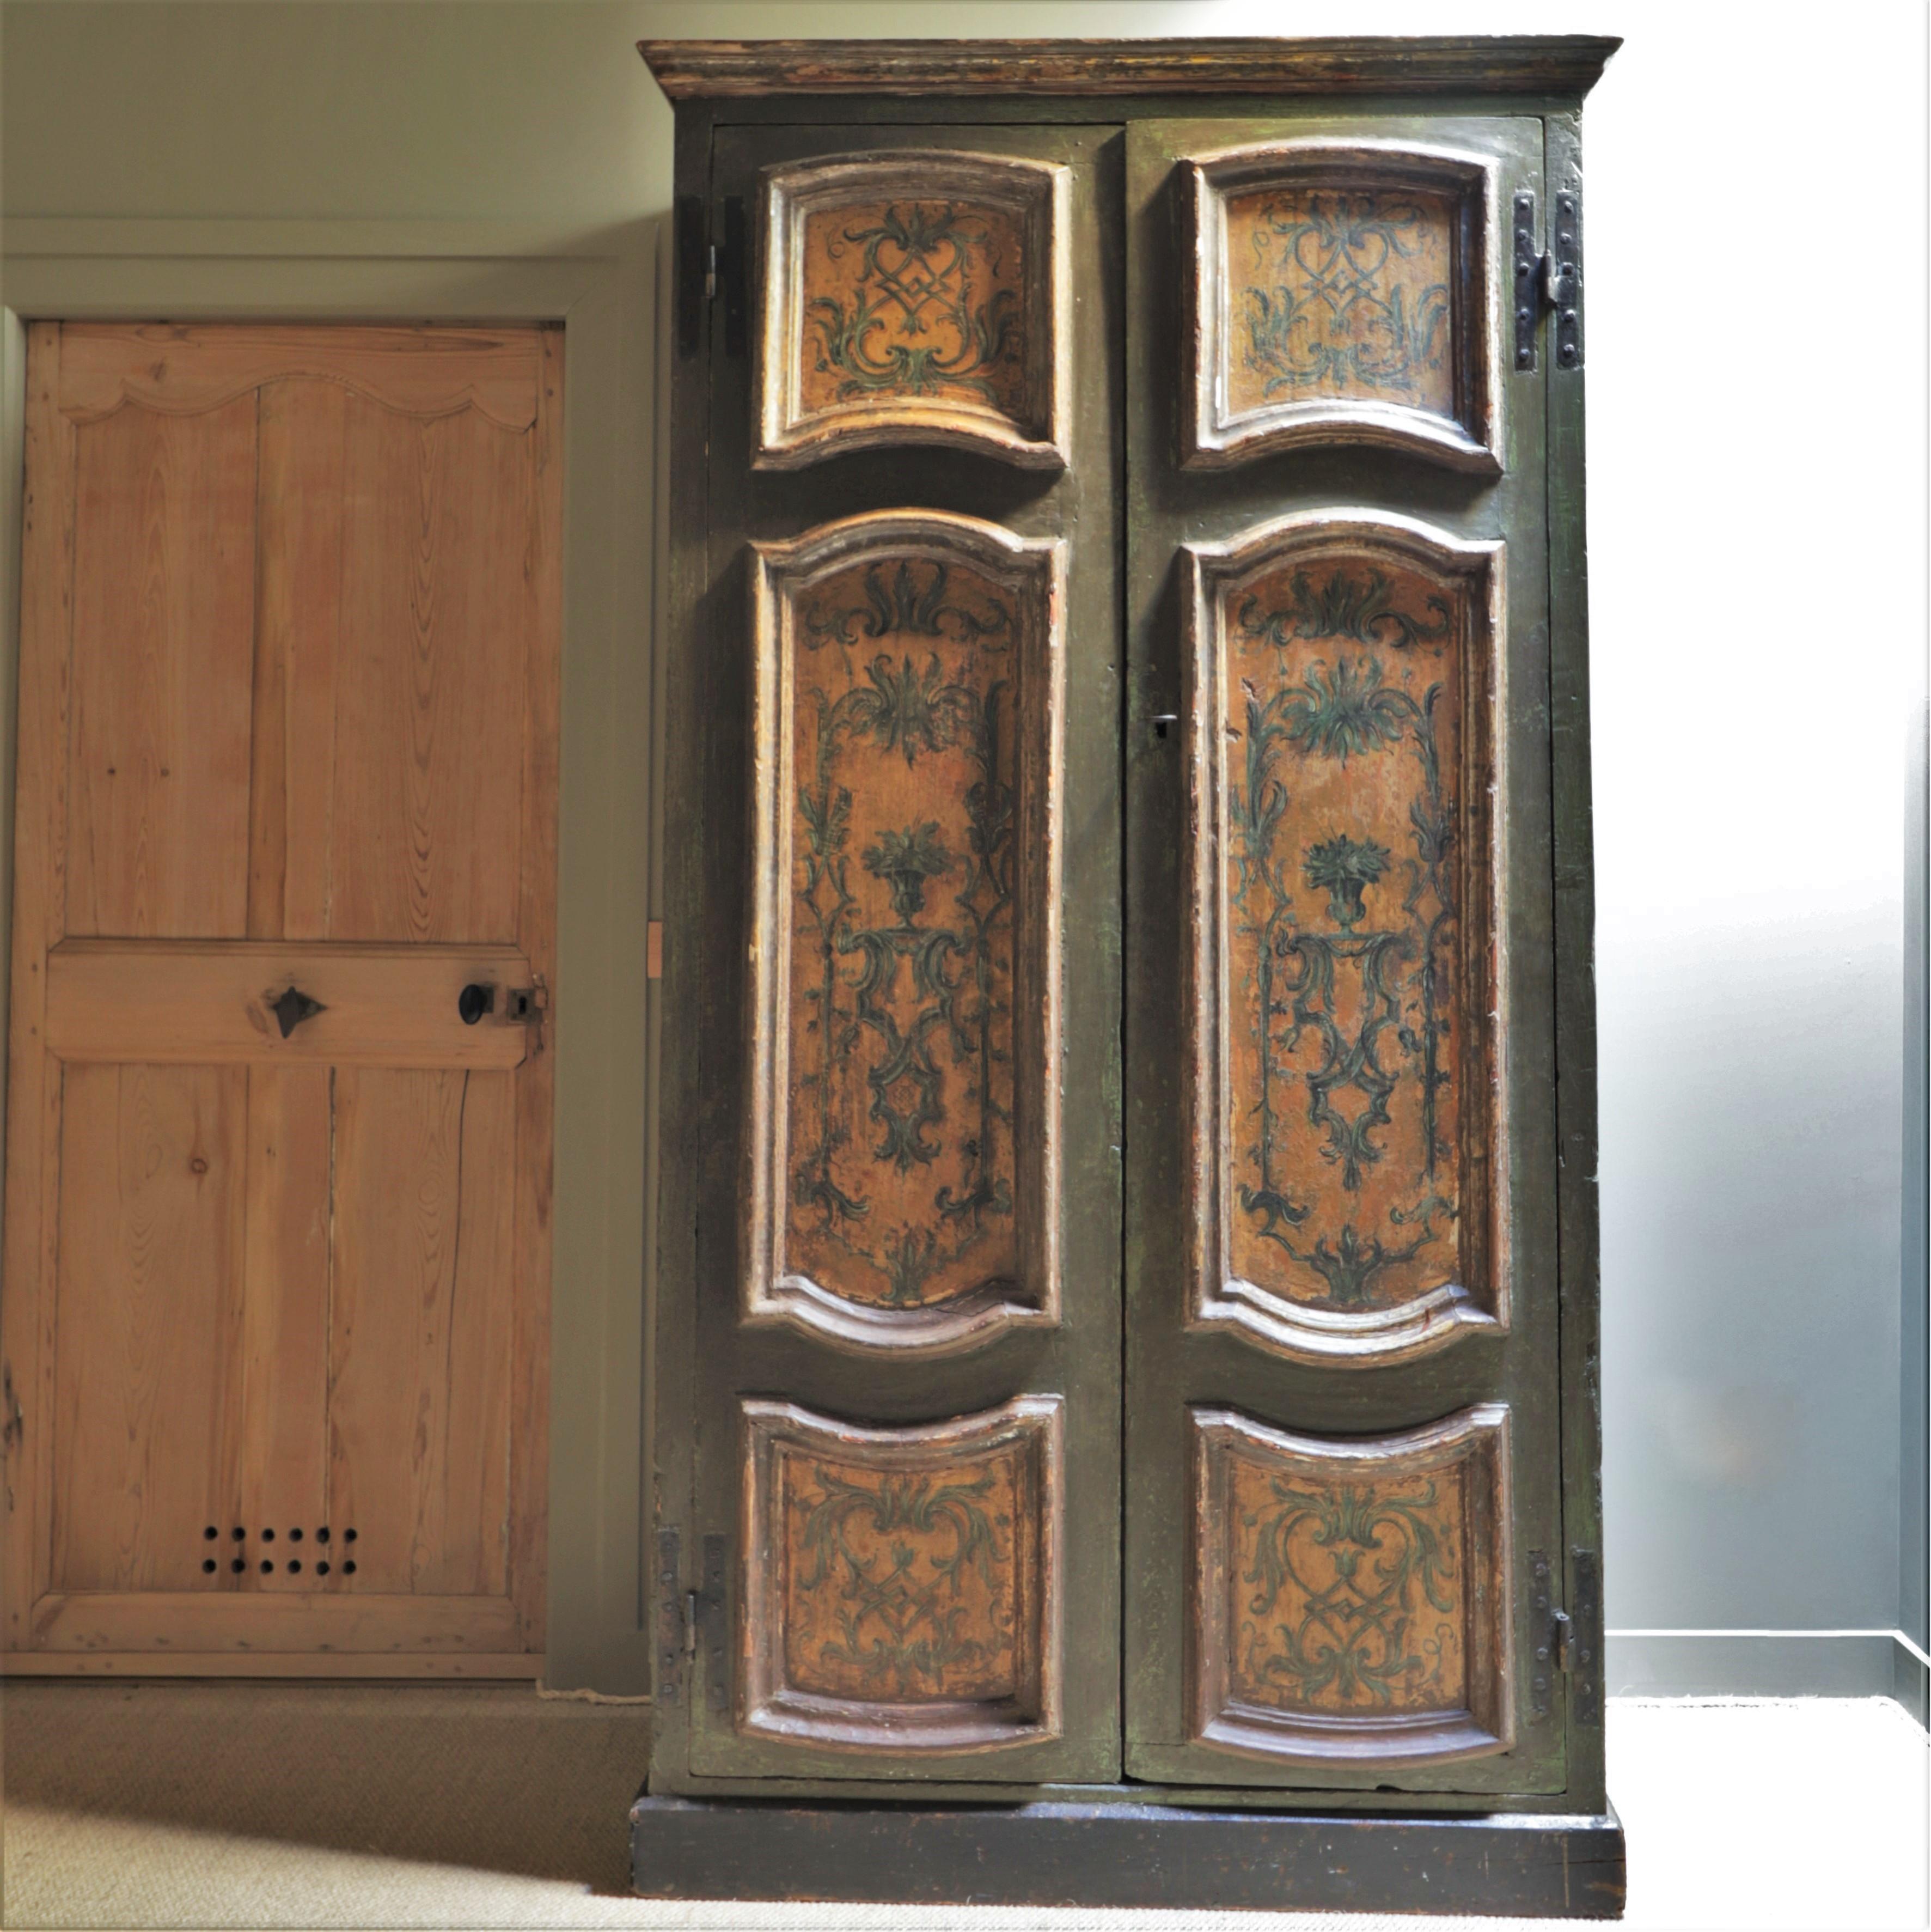 This Italian wardrobe dates from the 18th century. It is adorned with floral and vegetal patterns and painted in shades of green and ochre.